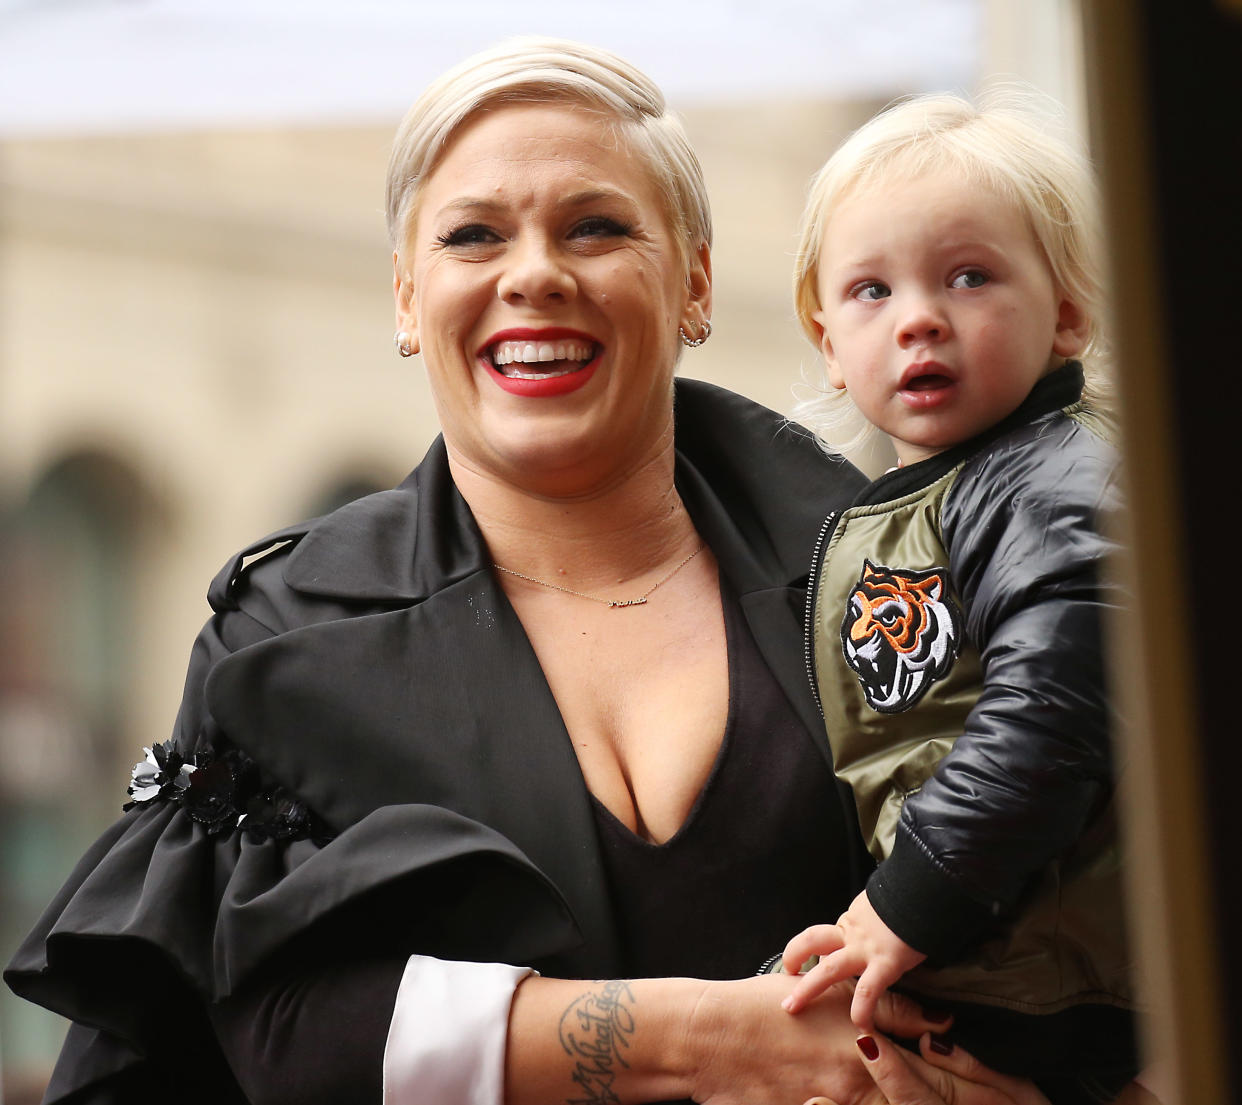 Pink, who along with her son Jameson battled COVID-19, says the illness marked a difficult time in motherhood. (Photo by Michael Tran/FilmMagic)